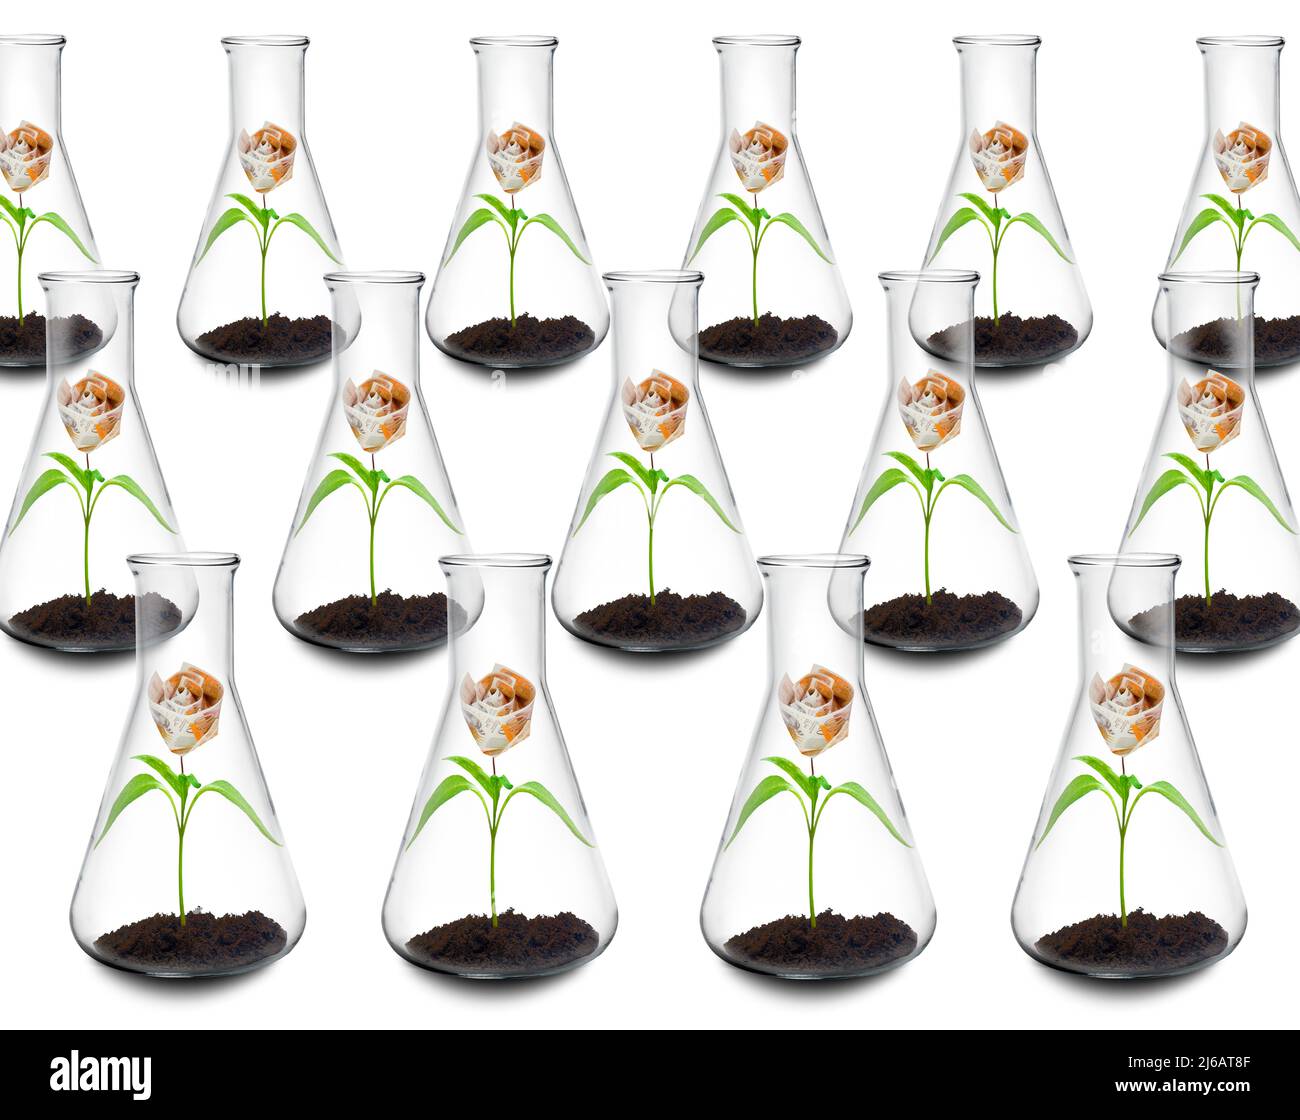 Cost of botanical research, conceptual image Stock Photo